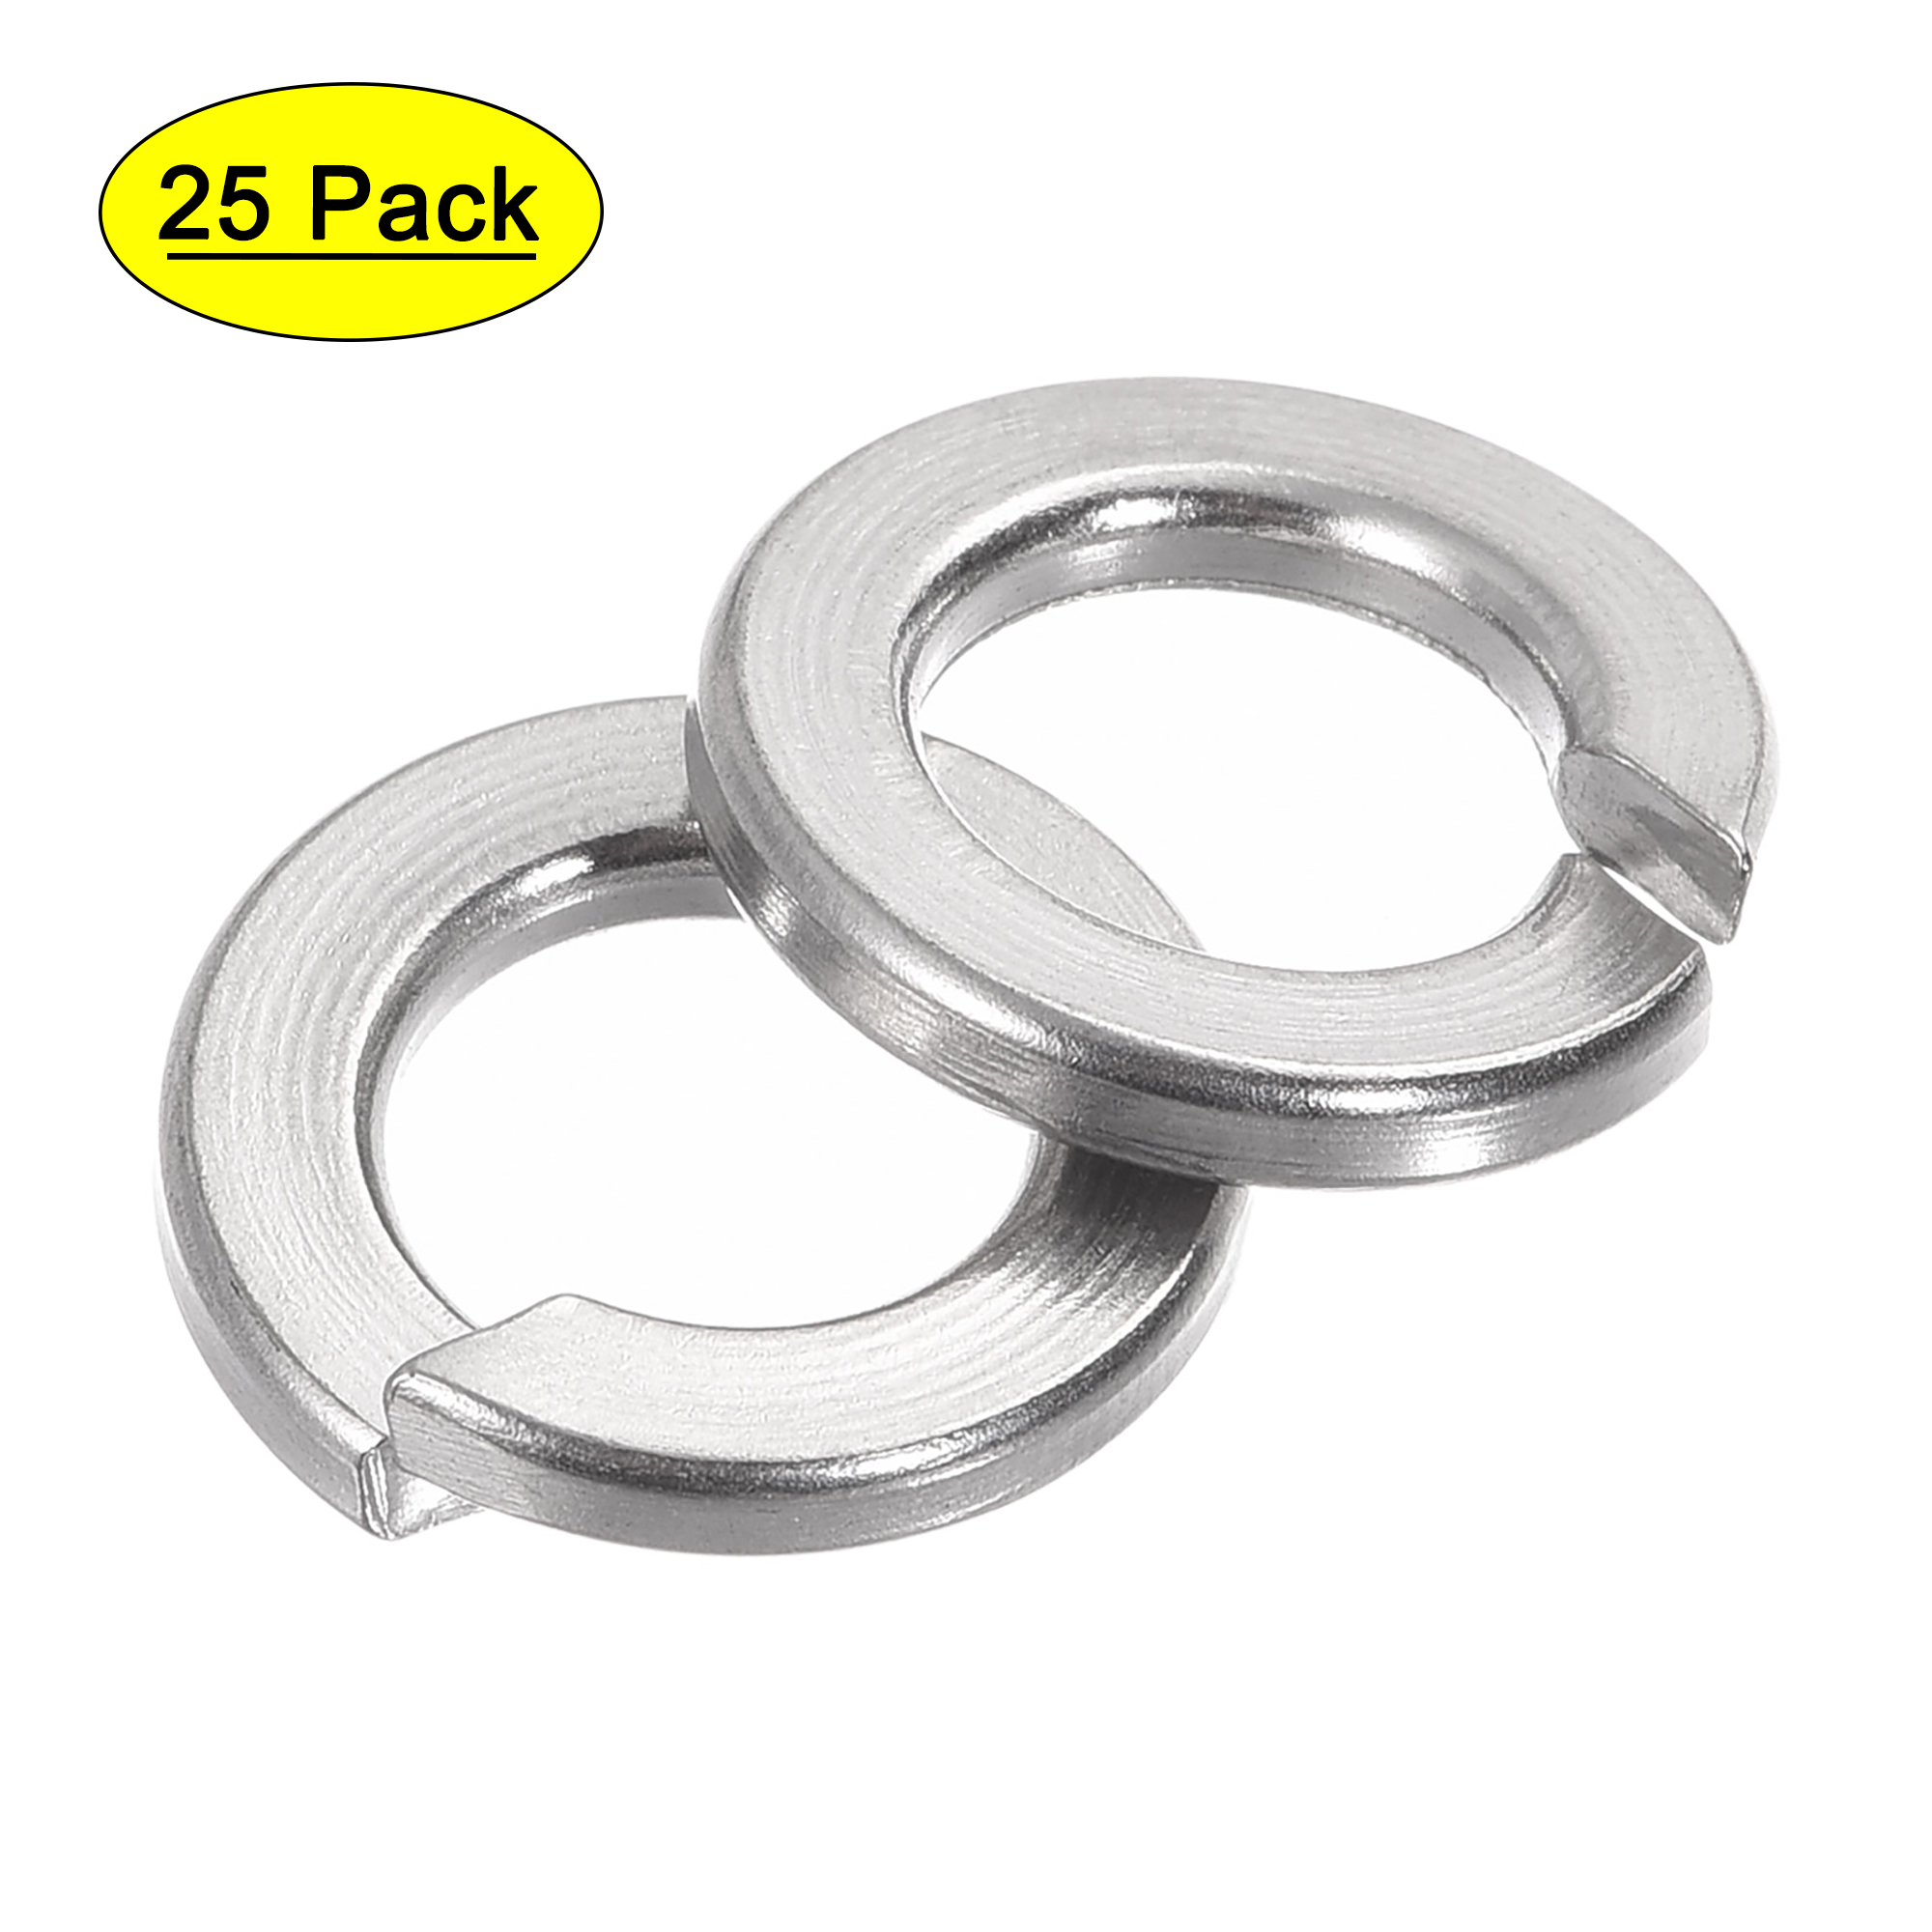 Uxcell 9/16-Inch 304 Stainless Steel Split Spring Lock Washer 25 Pack - image 1 of 5